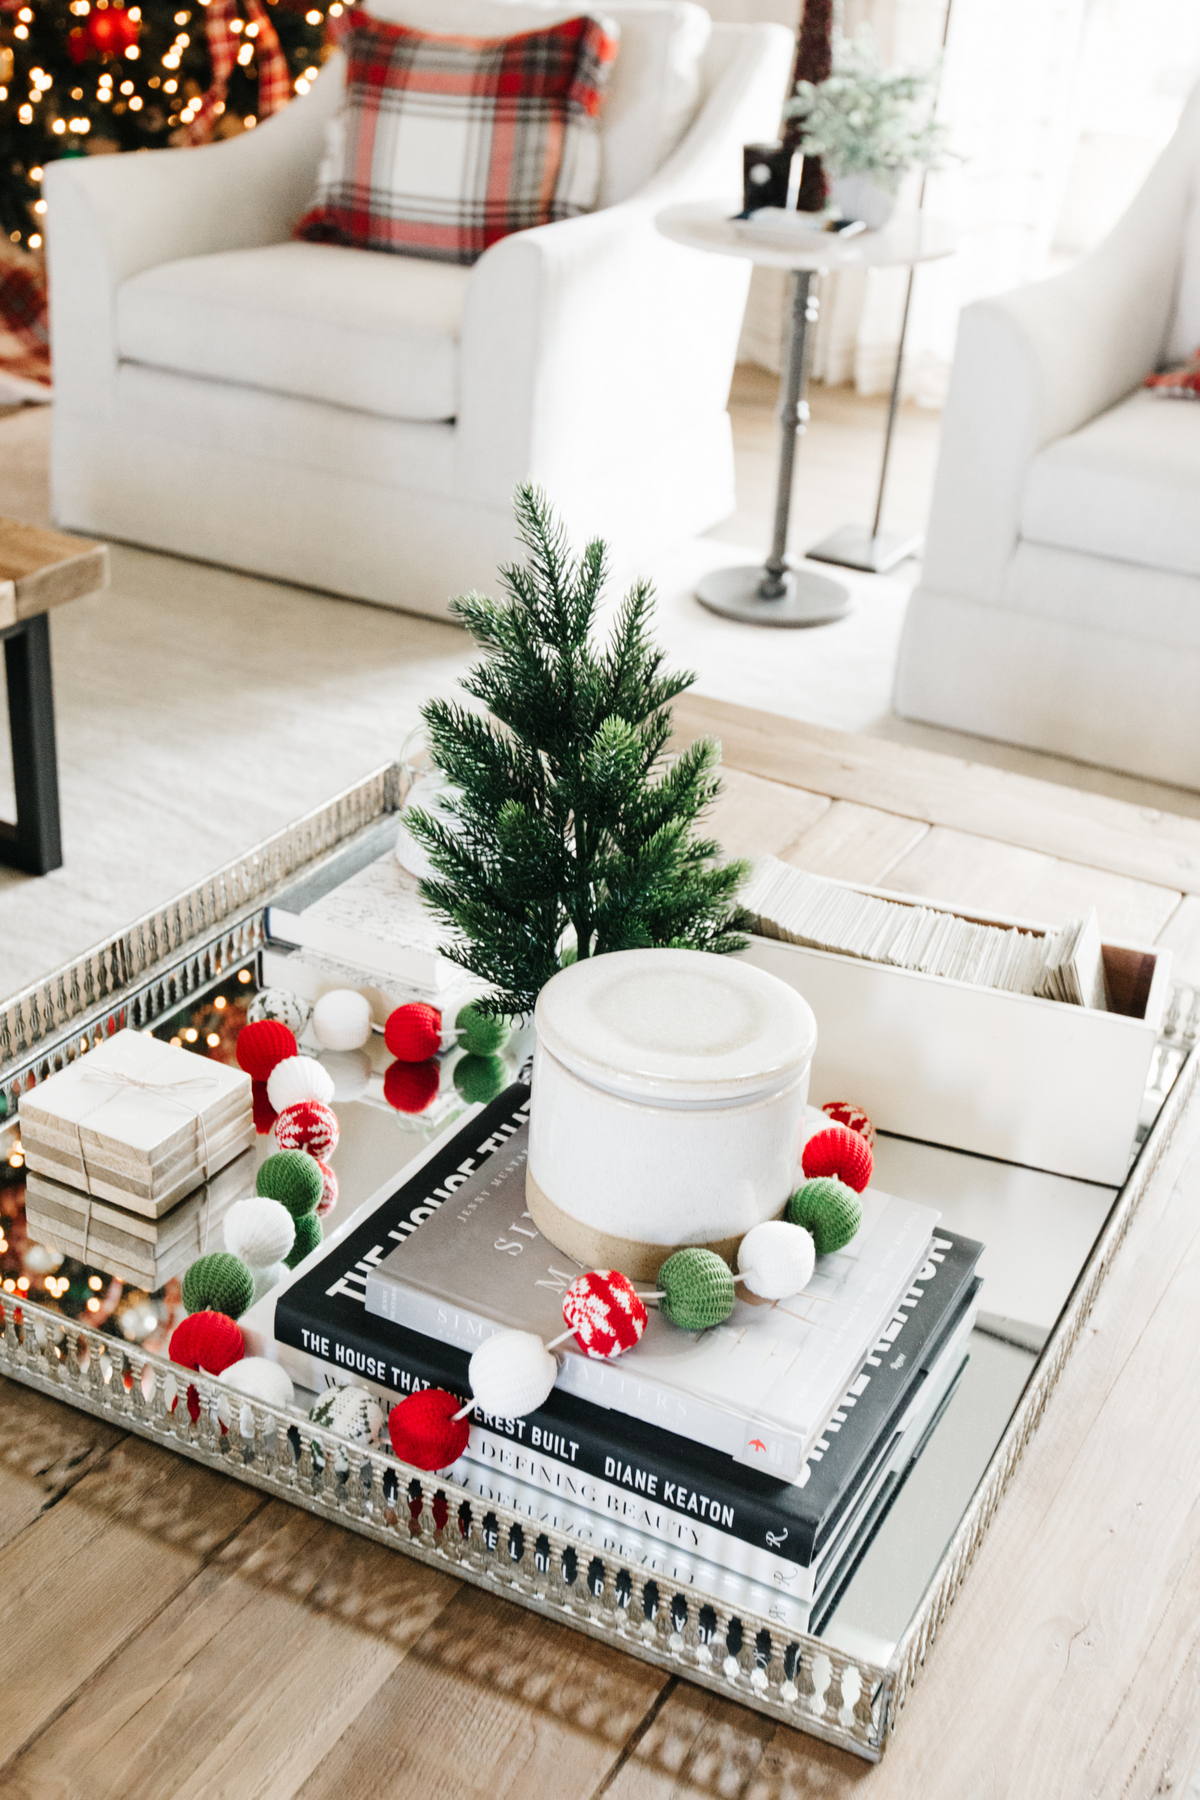 Christmas Styling Details | The TomKat Studio